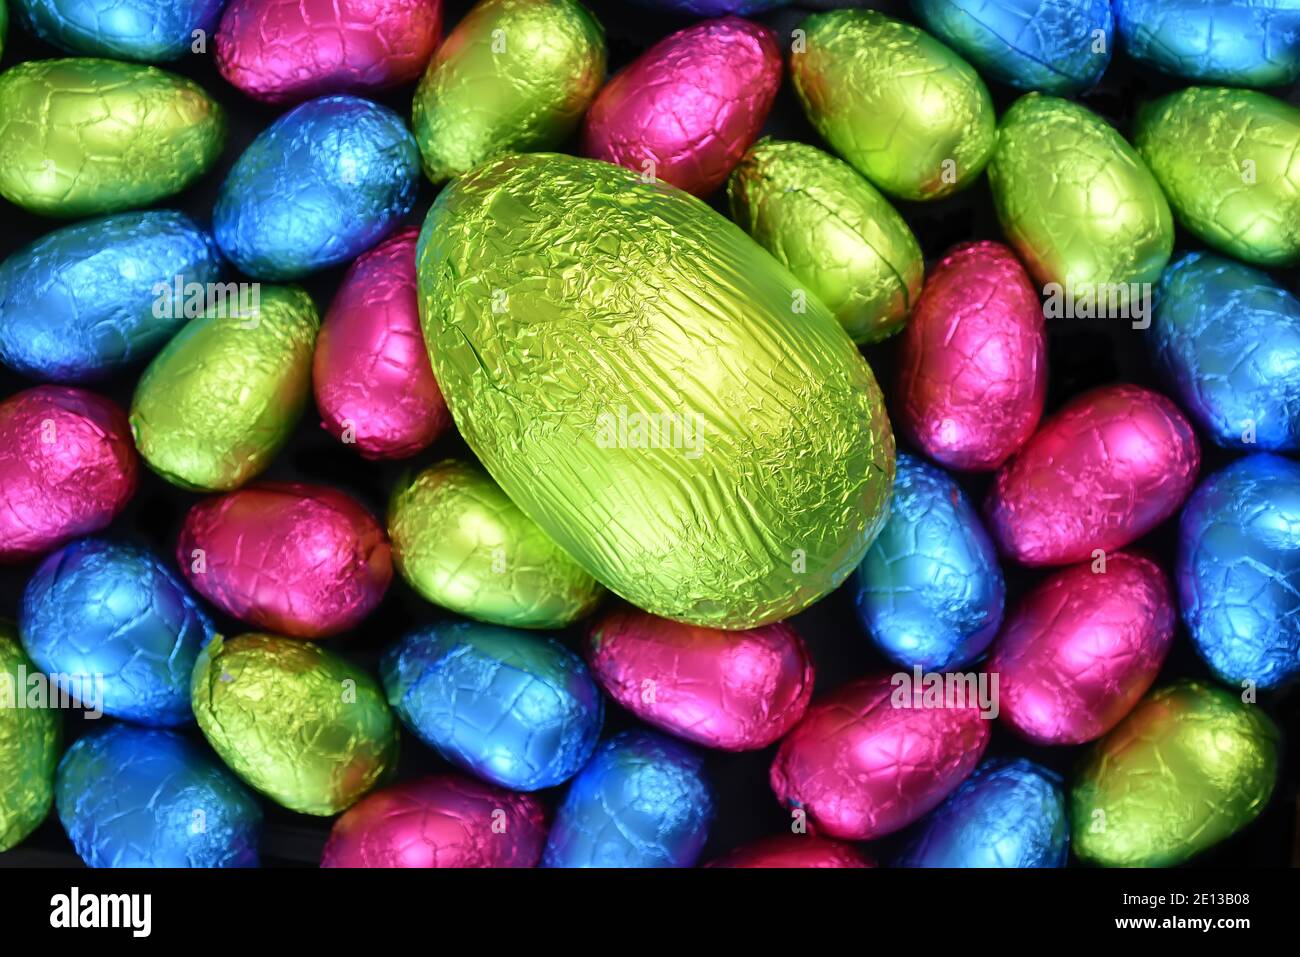 Pile group of multi coloured, different sizes of colourful foil wrapped chocolate easter eggs in pink, blue, yellow and lime green with a large egg. Stock Photo